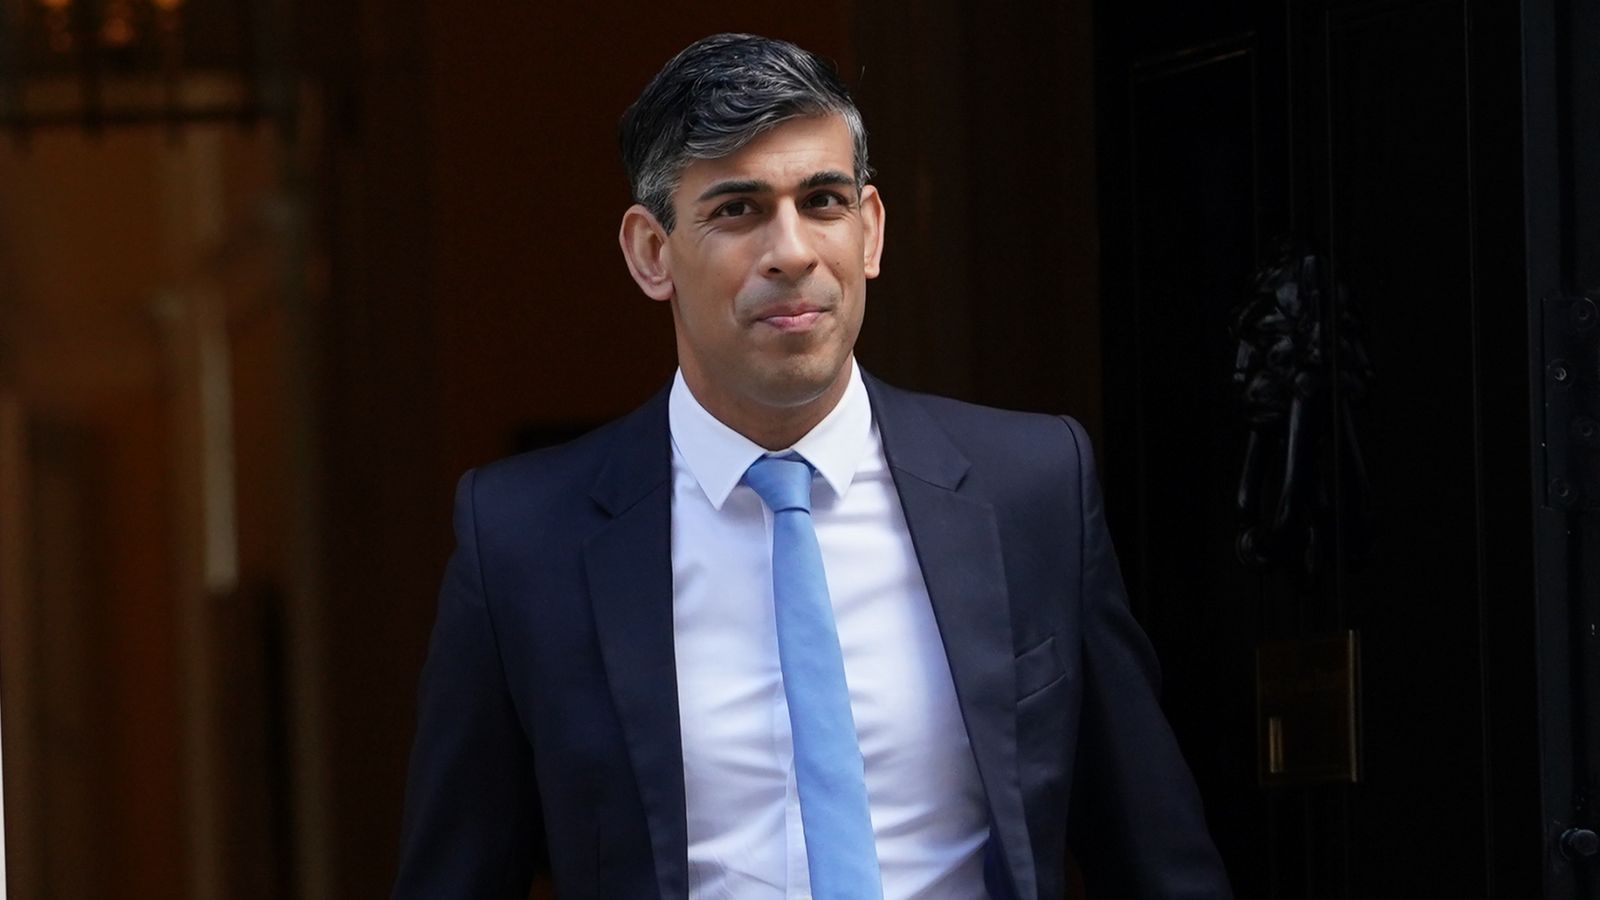 Rishi Sunak does not rule out July general election - but insists 'there'll be a clear choice' when it comes